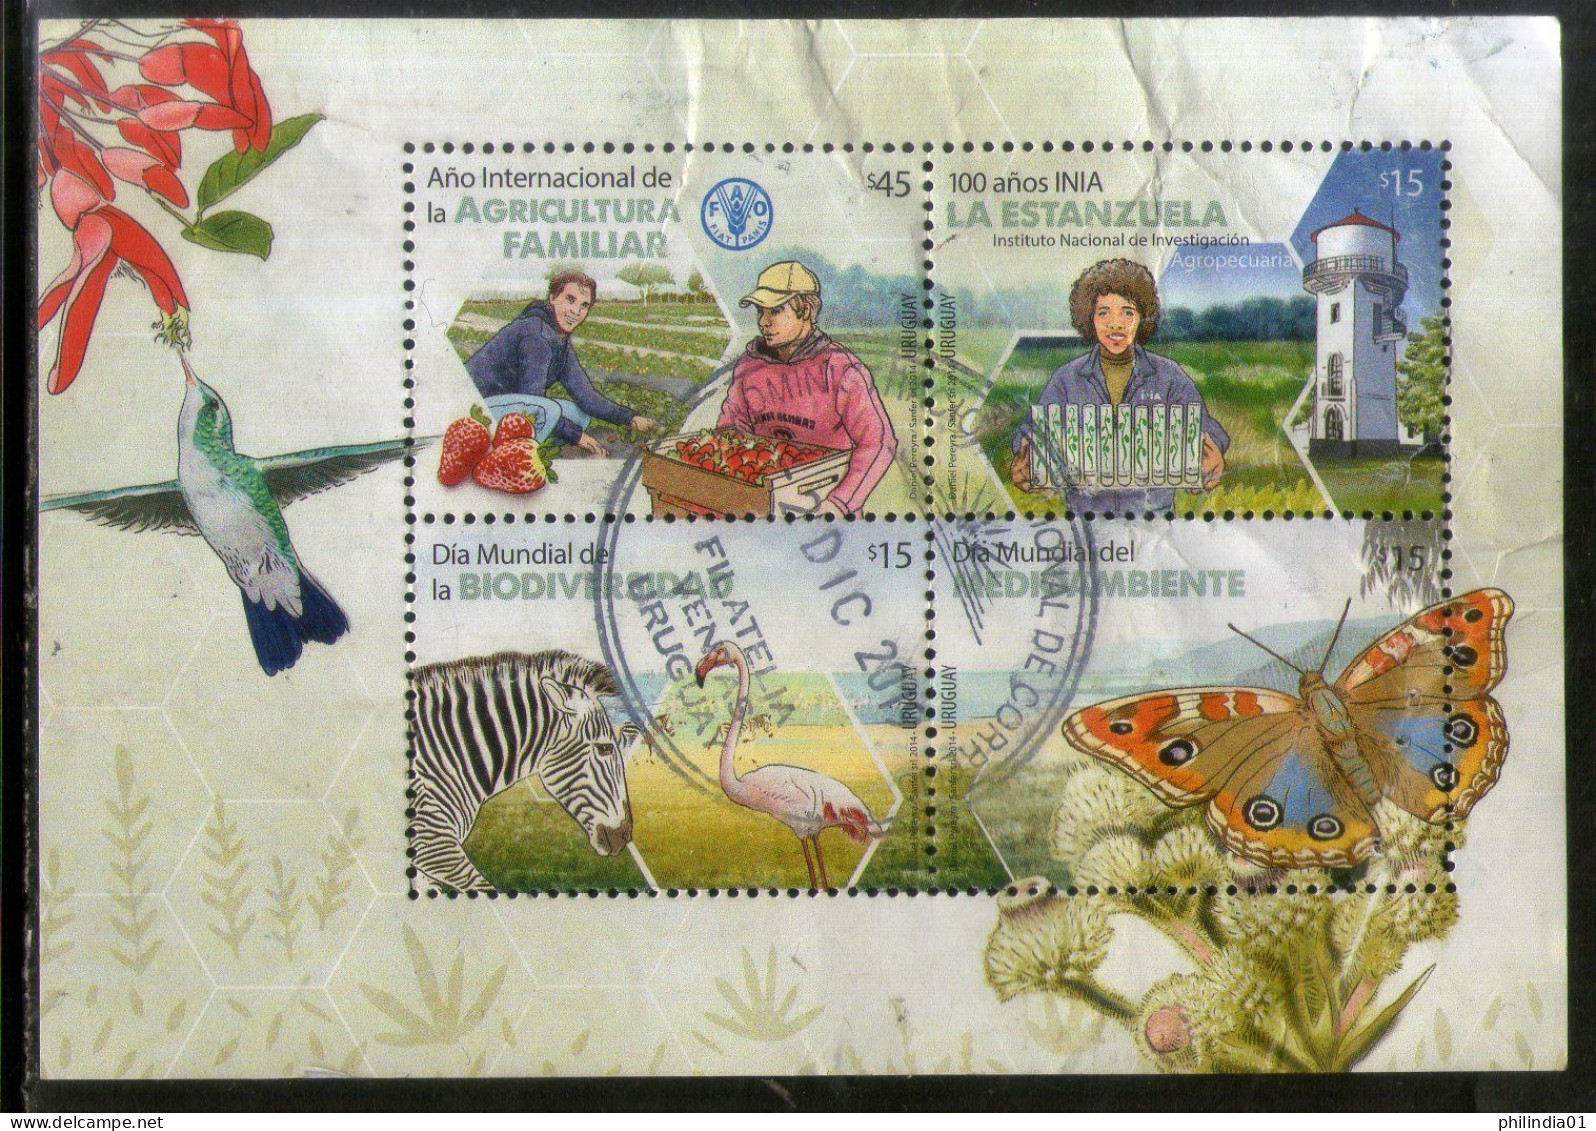 Uruguay 2014 Agriculture Biodiversity Animals Butterfly Bird Used M/s # 7641A - Agriculture